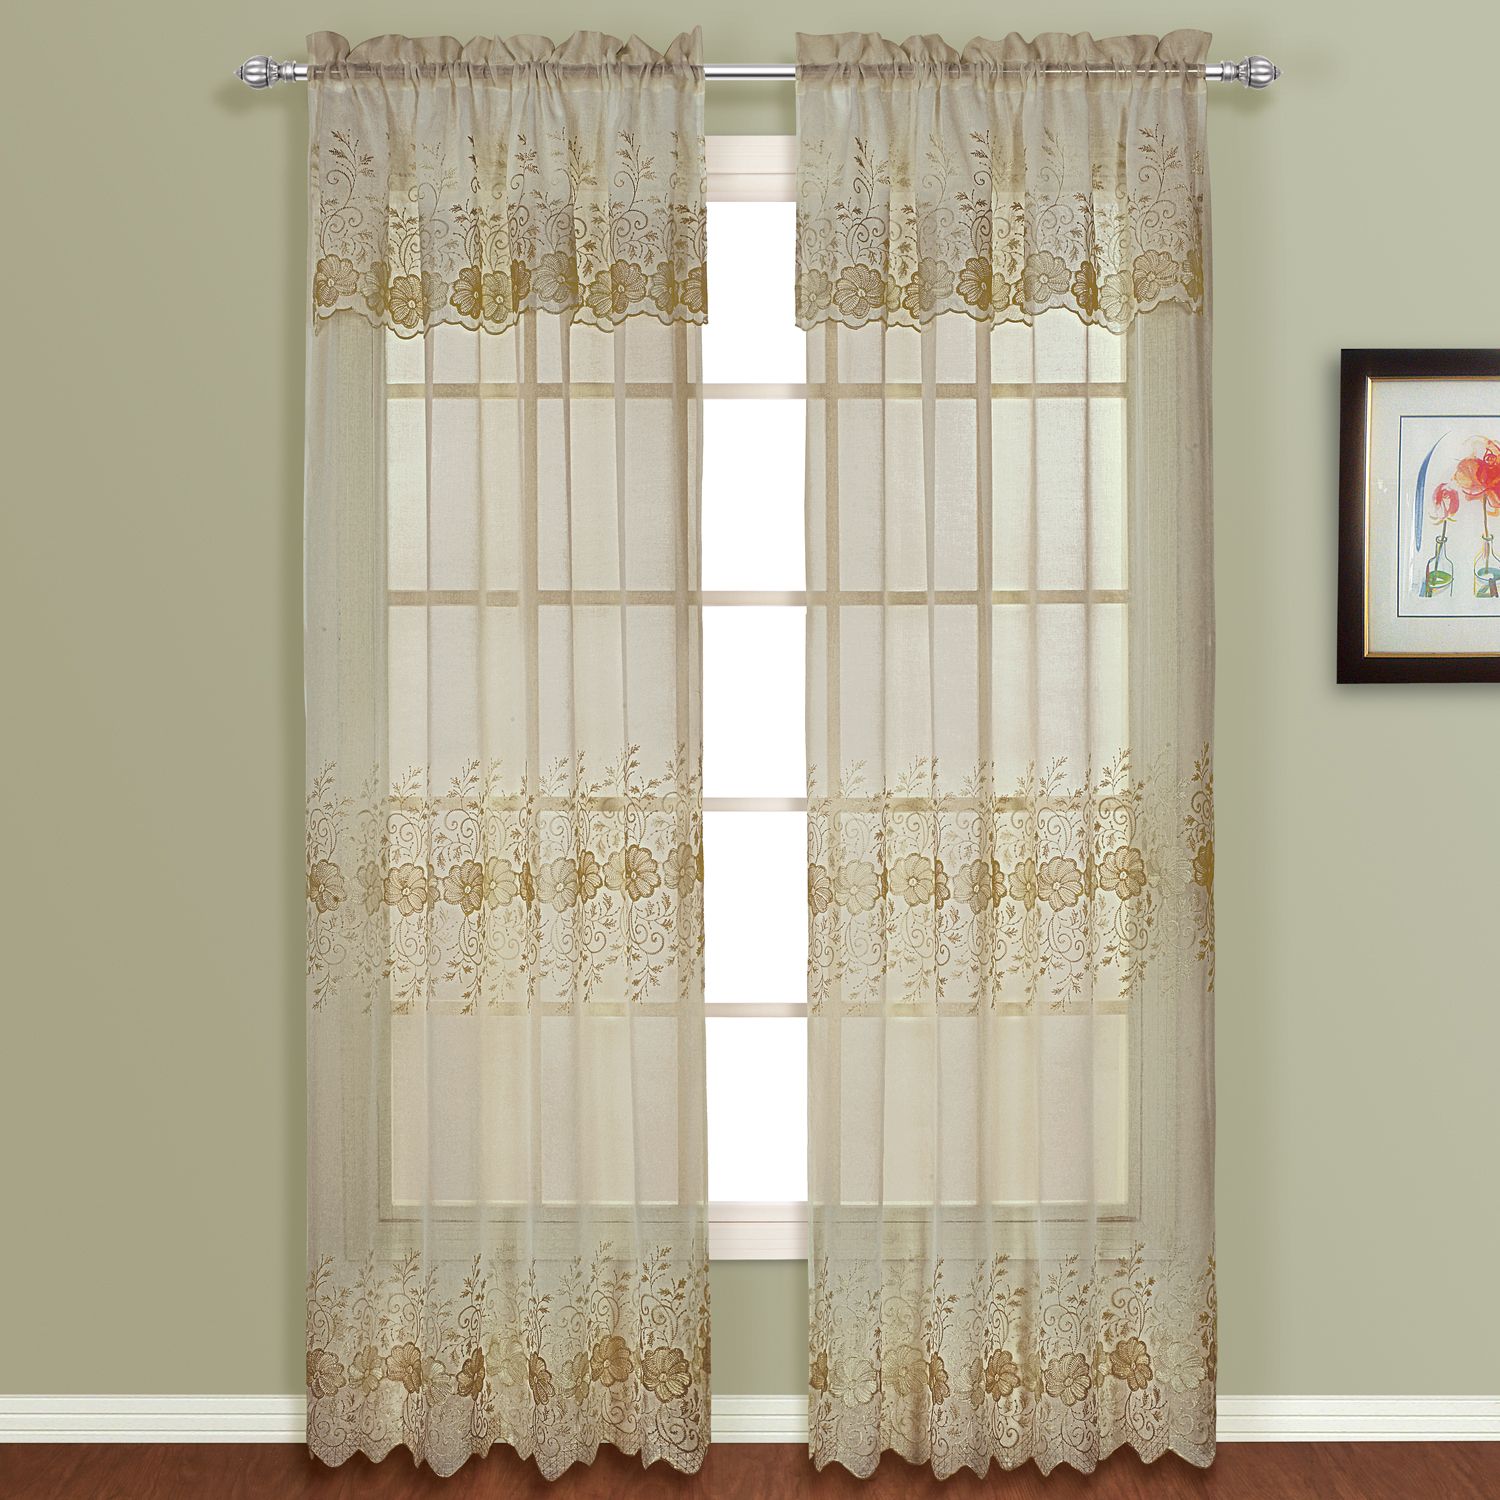 United Curtain Company Marianna 50" x 63" set of two embroidered panels available in Mocha